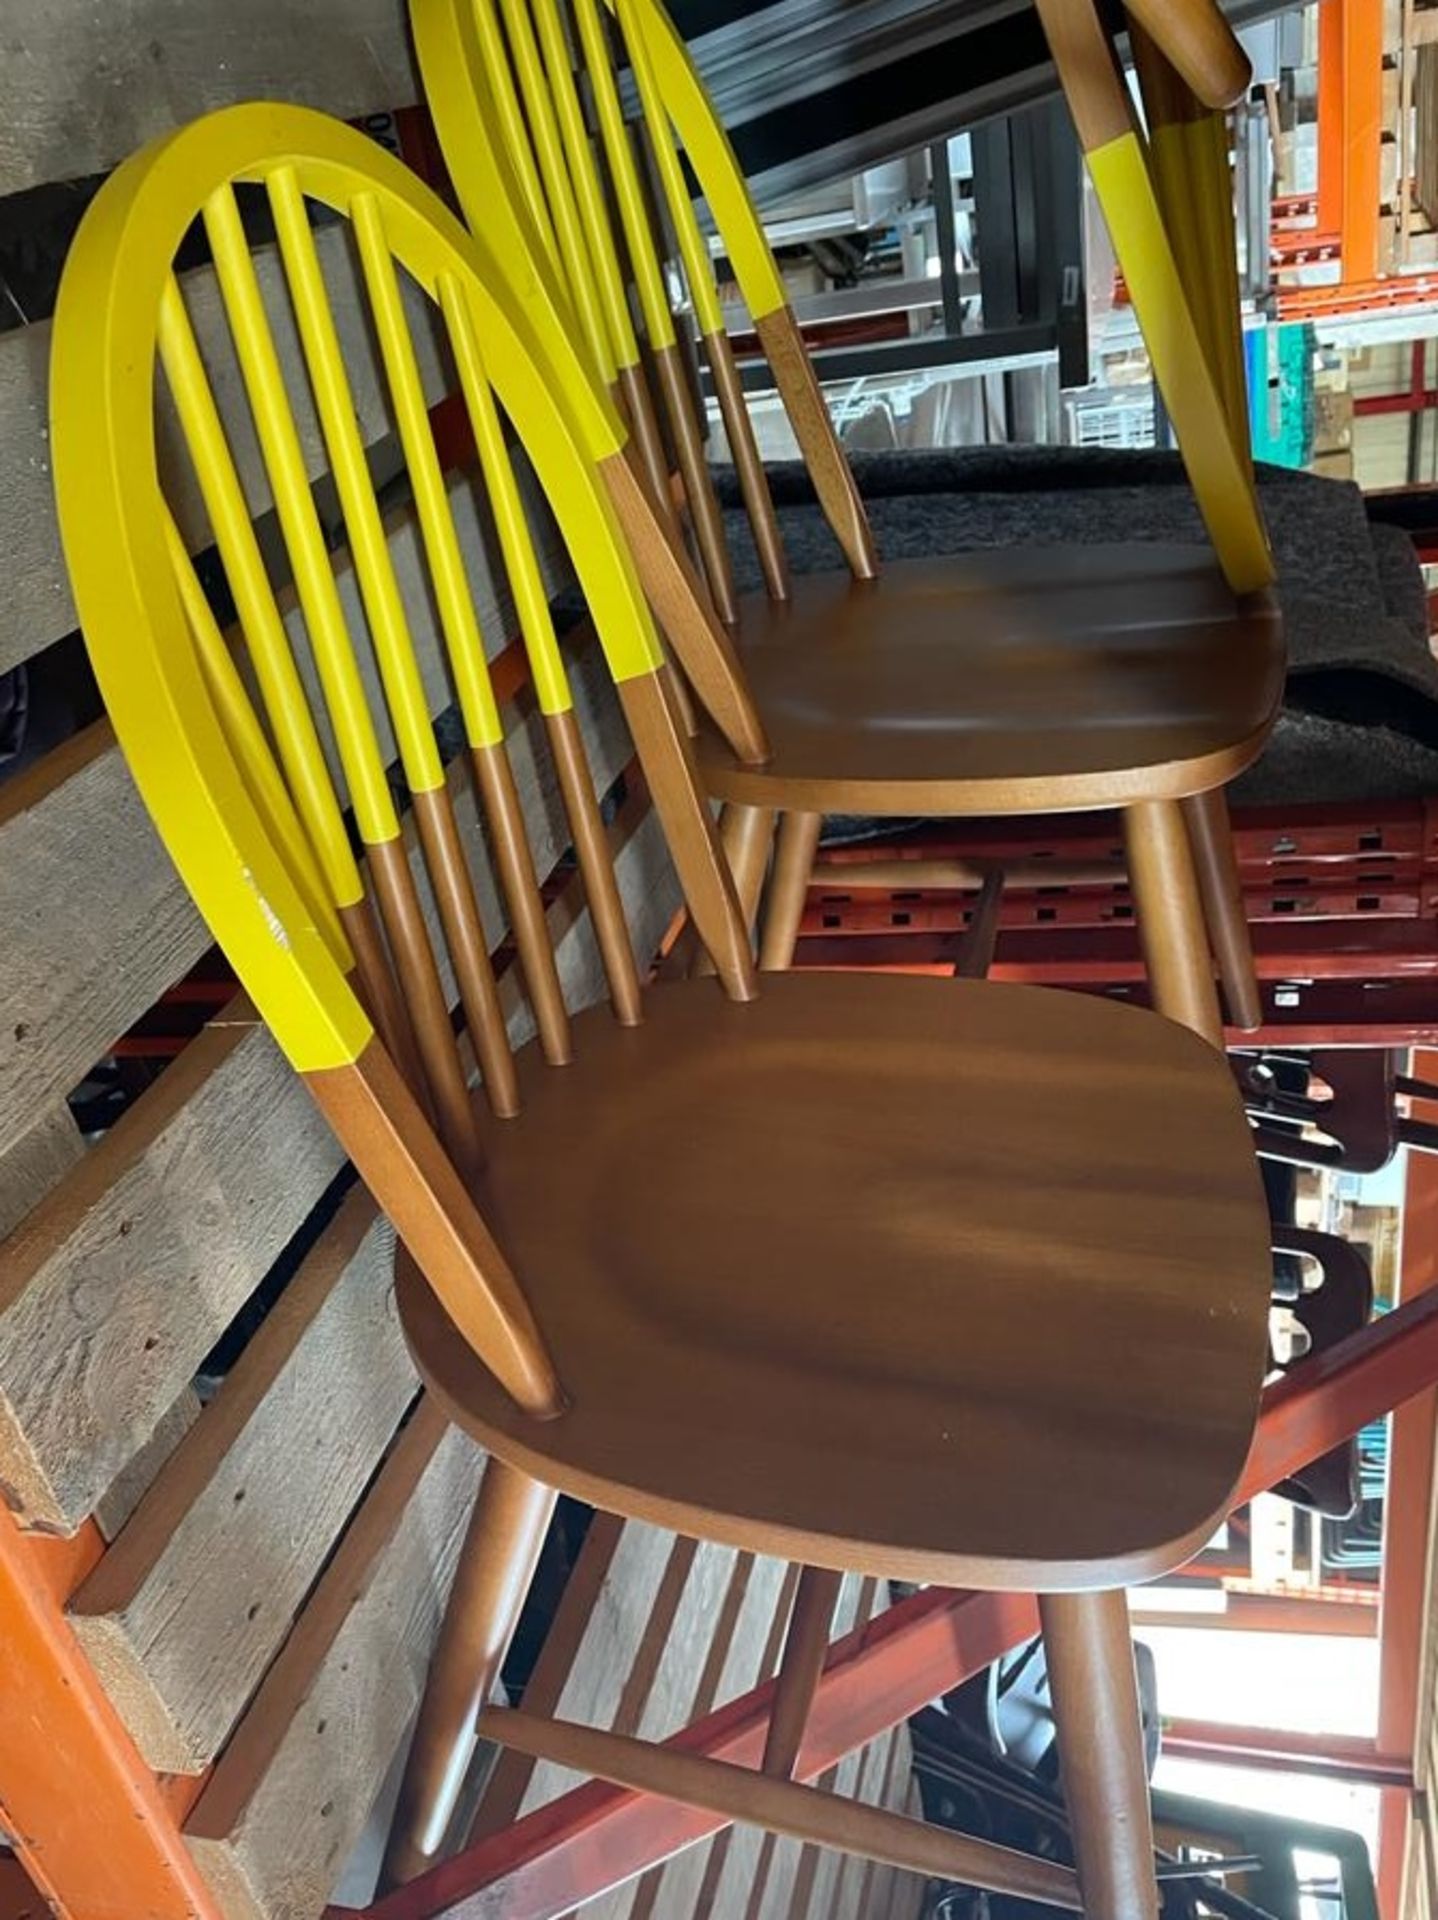 22 x Restaurant Dining Chairs - Contemporary Colourful Design With Wooden Finish and Part Painted in - Image 3 of 7